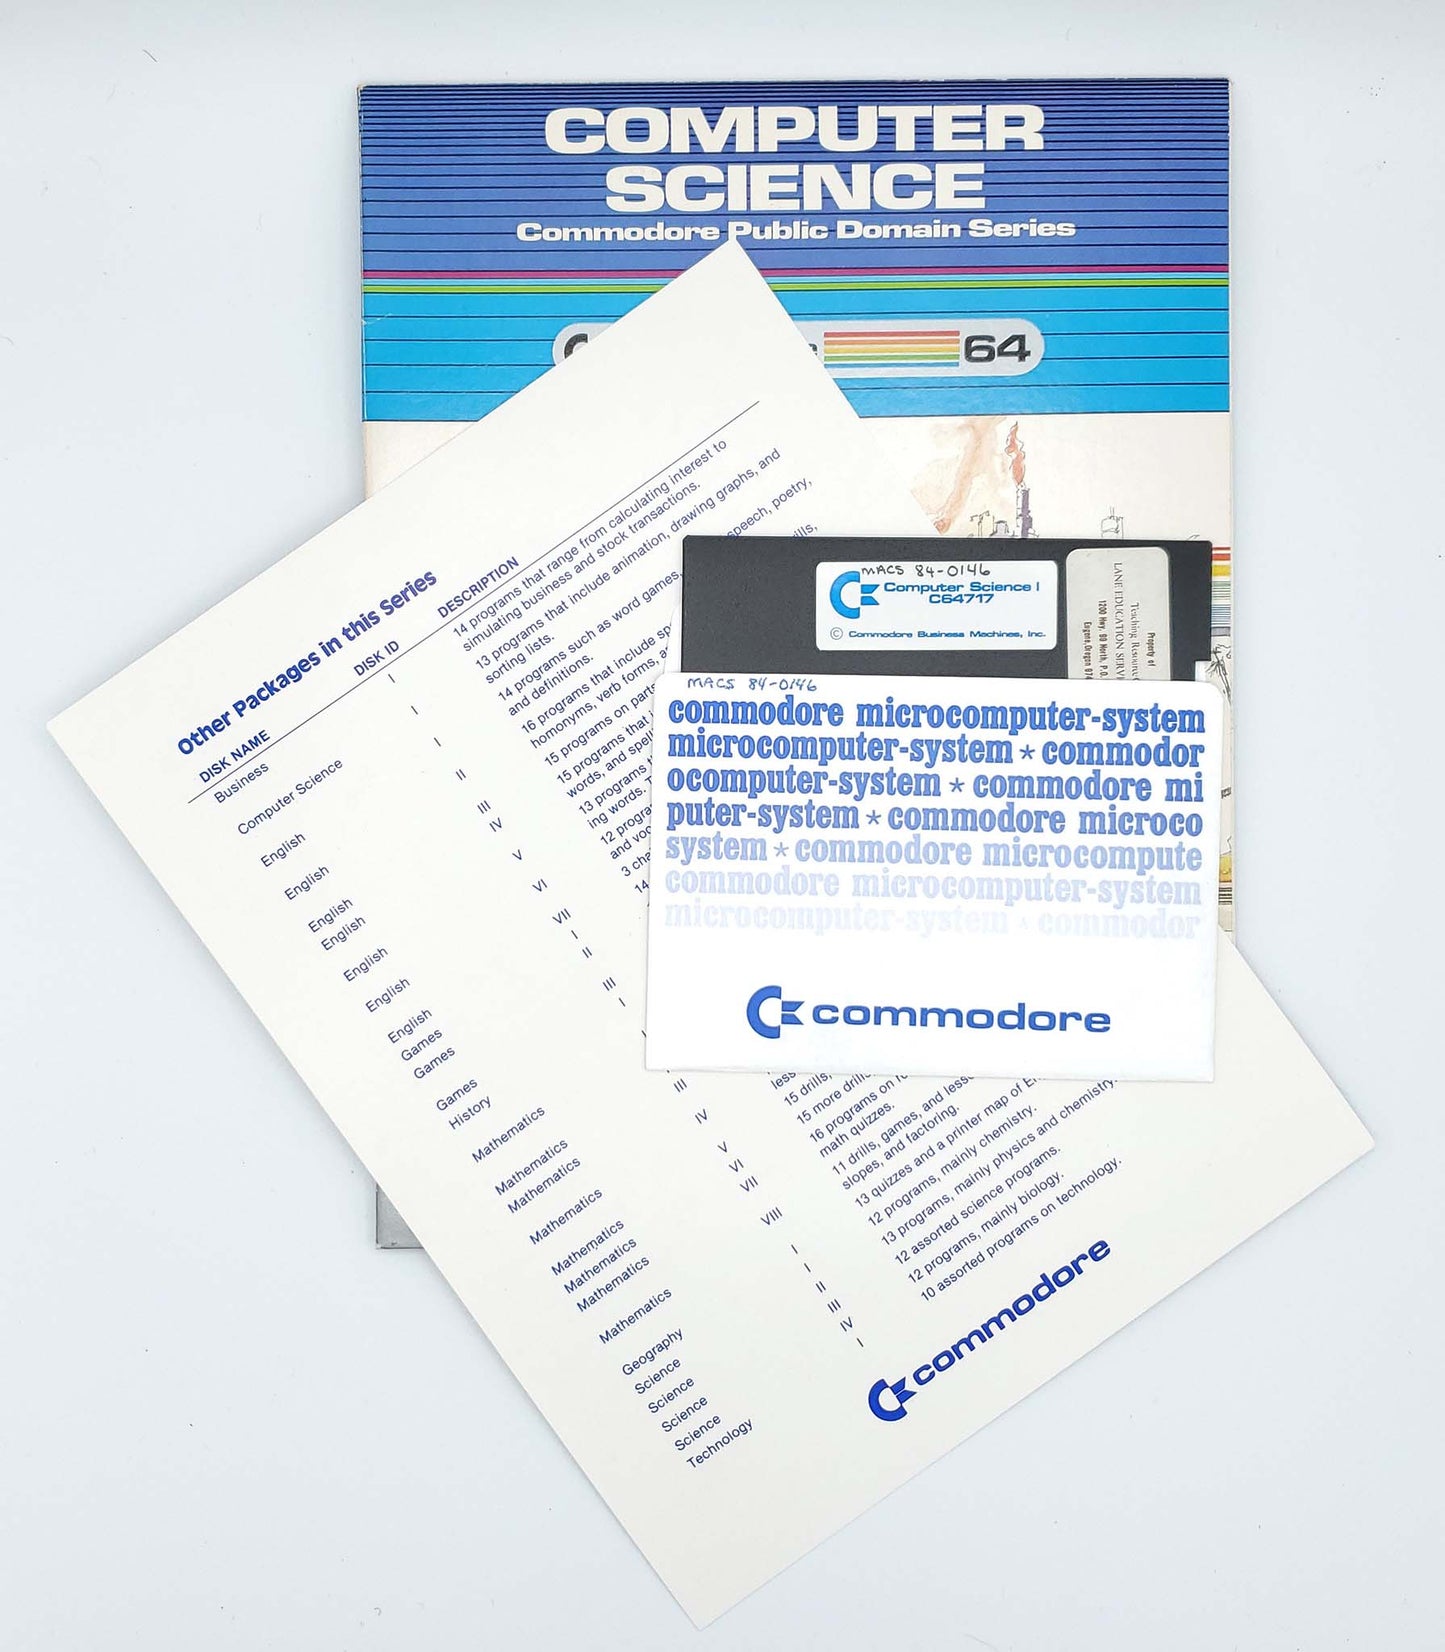 Computer Science from the Commodore Public Domain Series